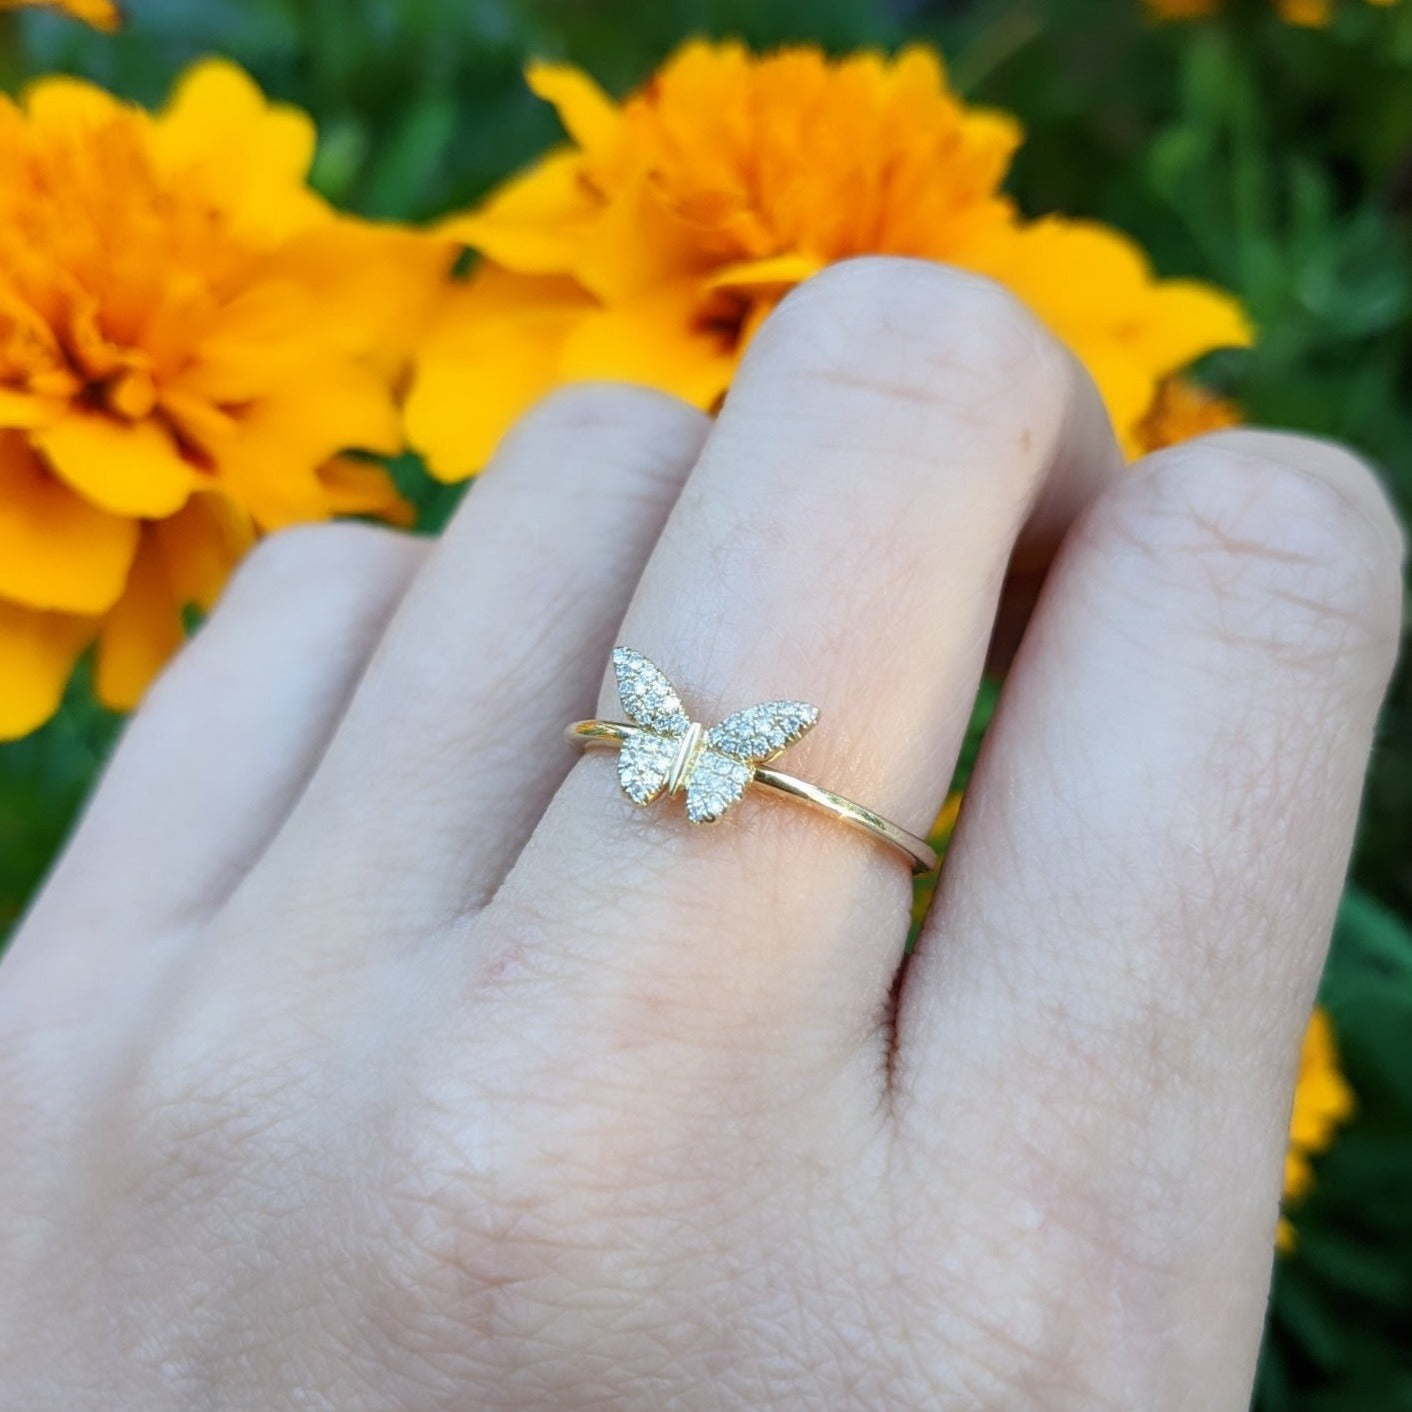 Floating Diamond Butterfly Ring